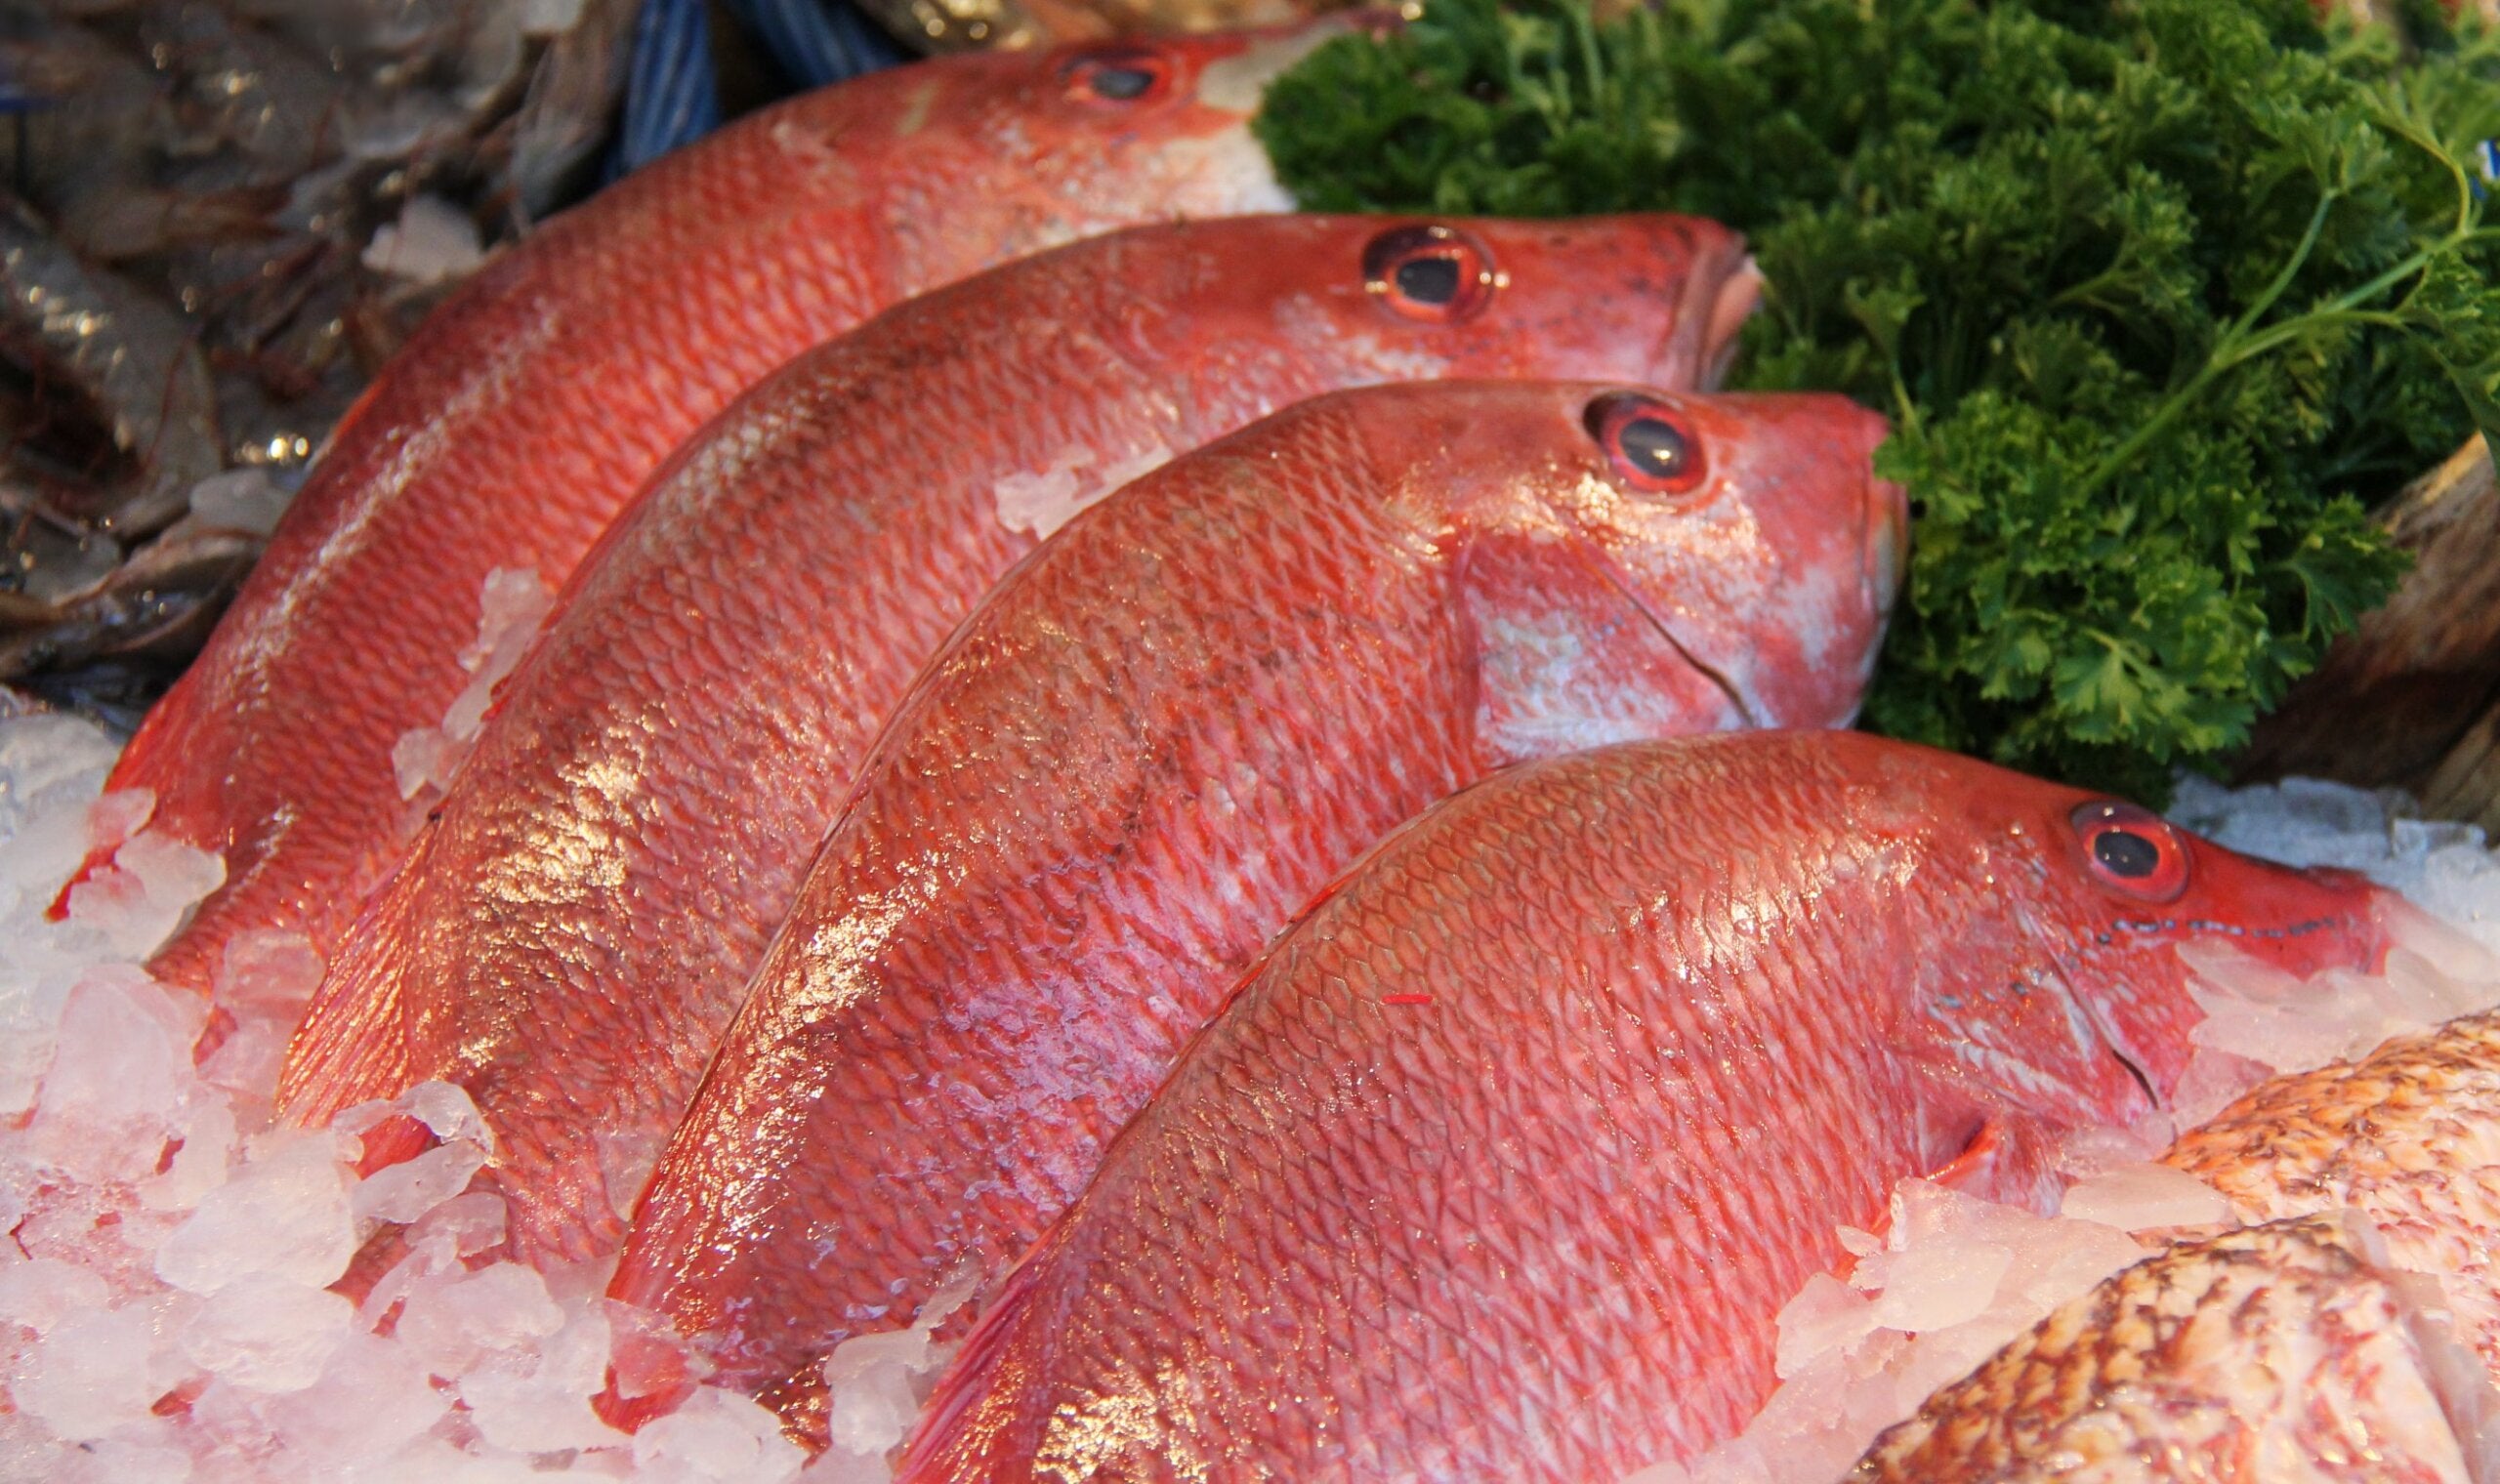 Red snapper: nutritional value, benefits and consumption